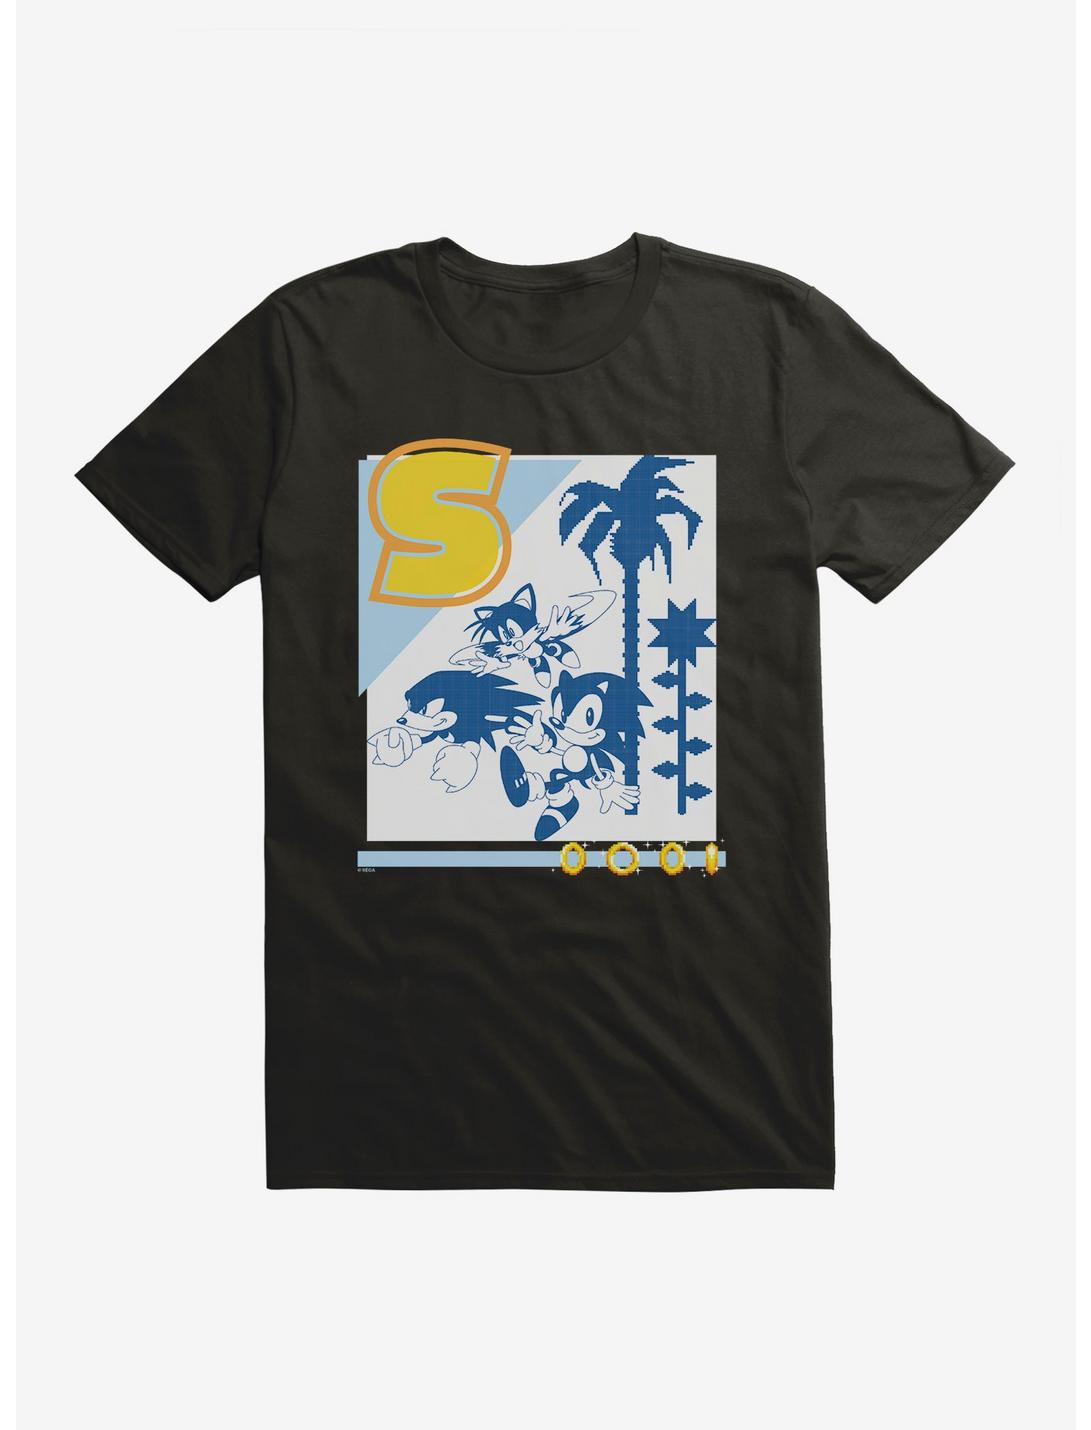 Sonic The Hedgehog Sonic, Tails, And Knuckles T-Shirt, BLACK, hi-res